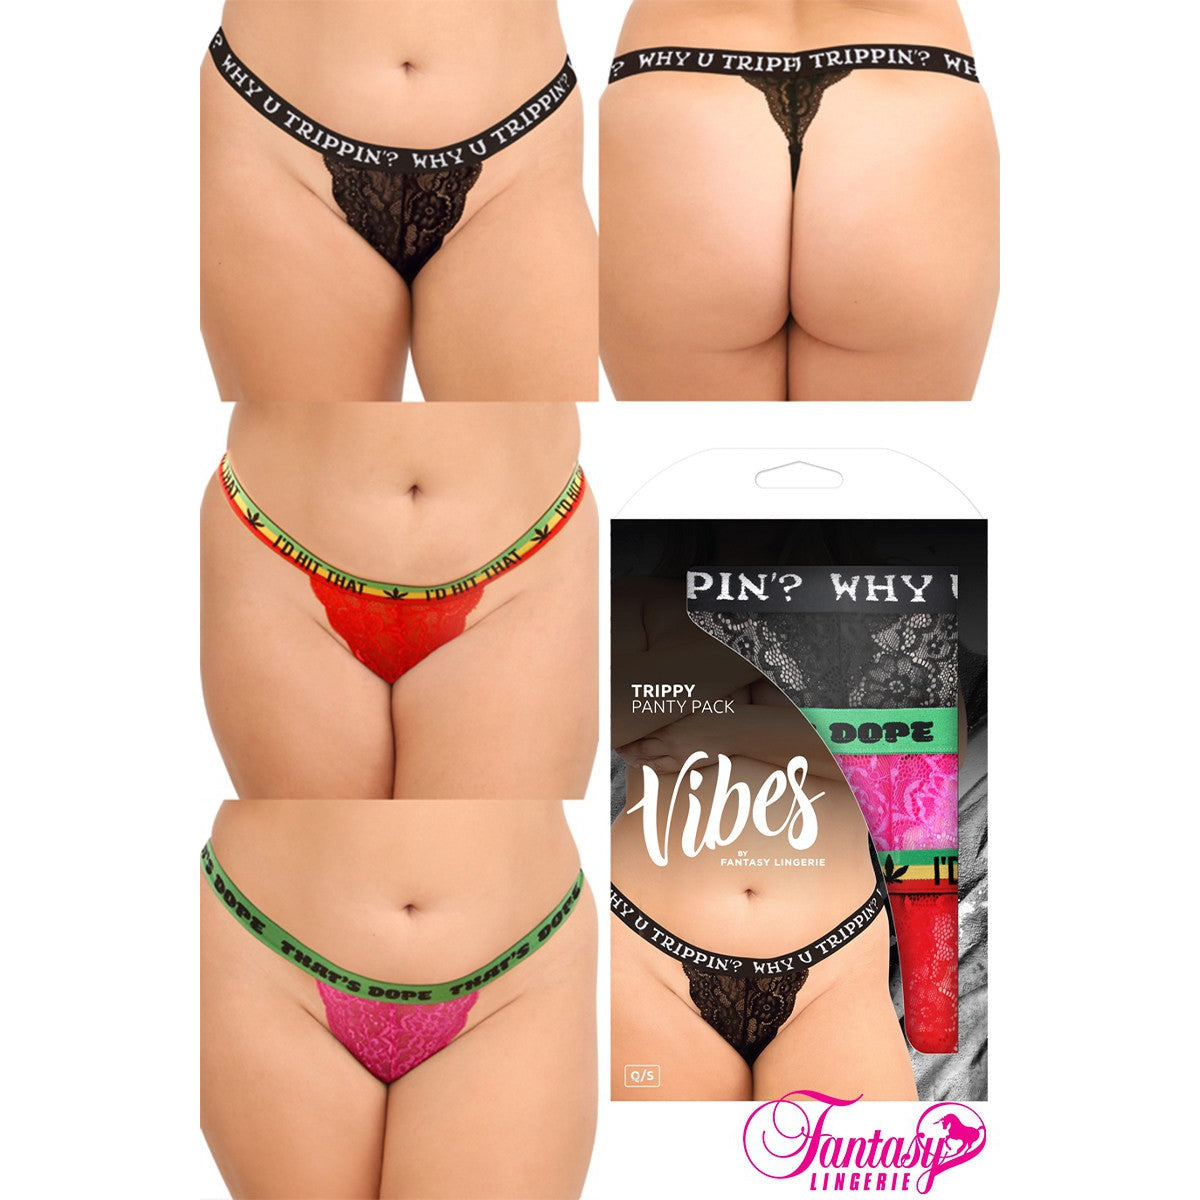 Vibes Trippy Thong Panty 3pk by Fantasy Lingerie